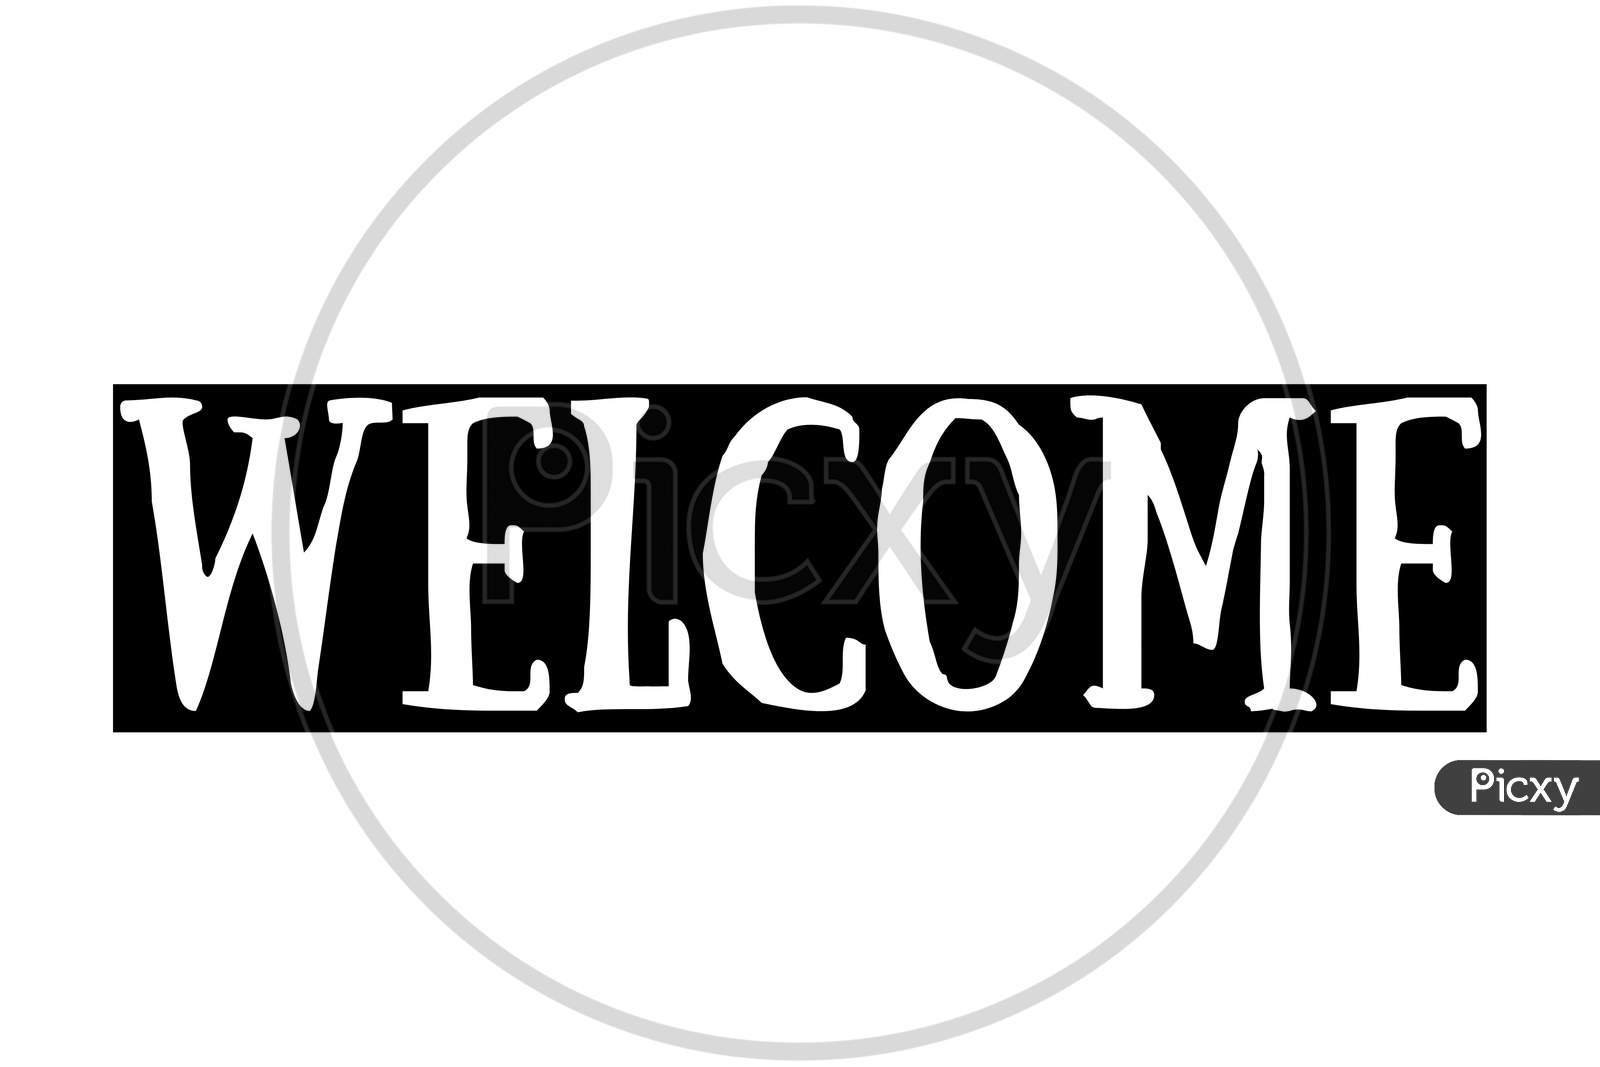 Welcome Poster With Spectrum Brush Strokes On White Background.